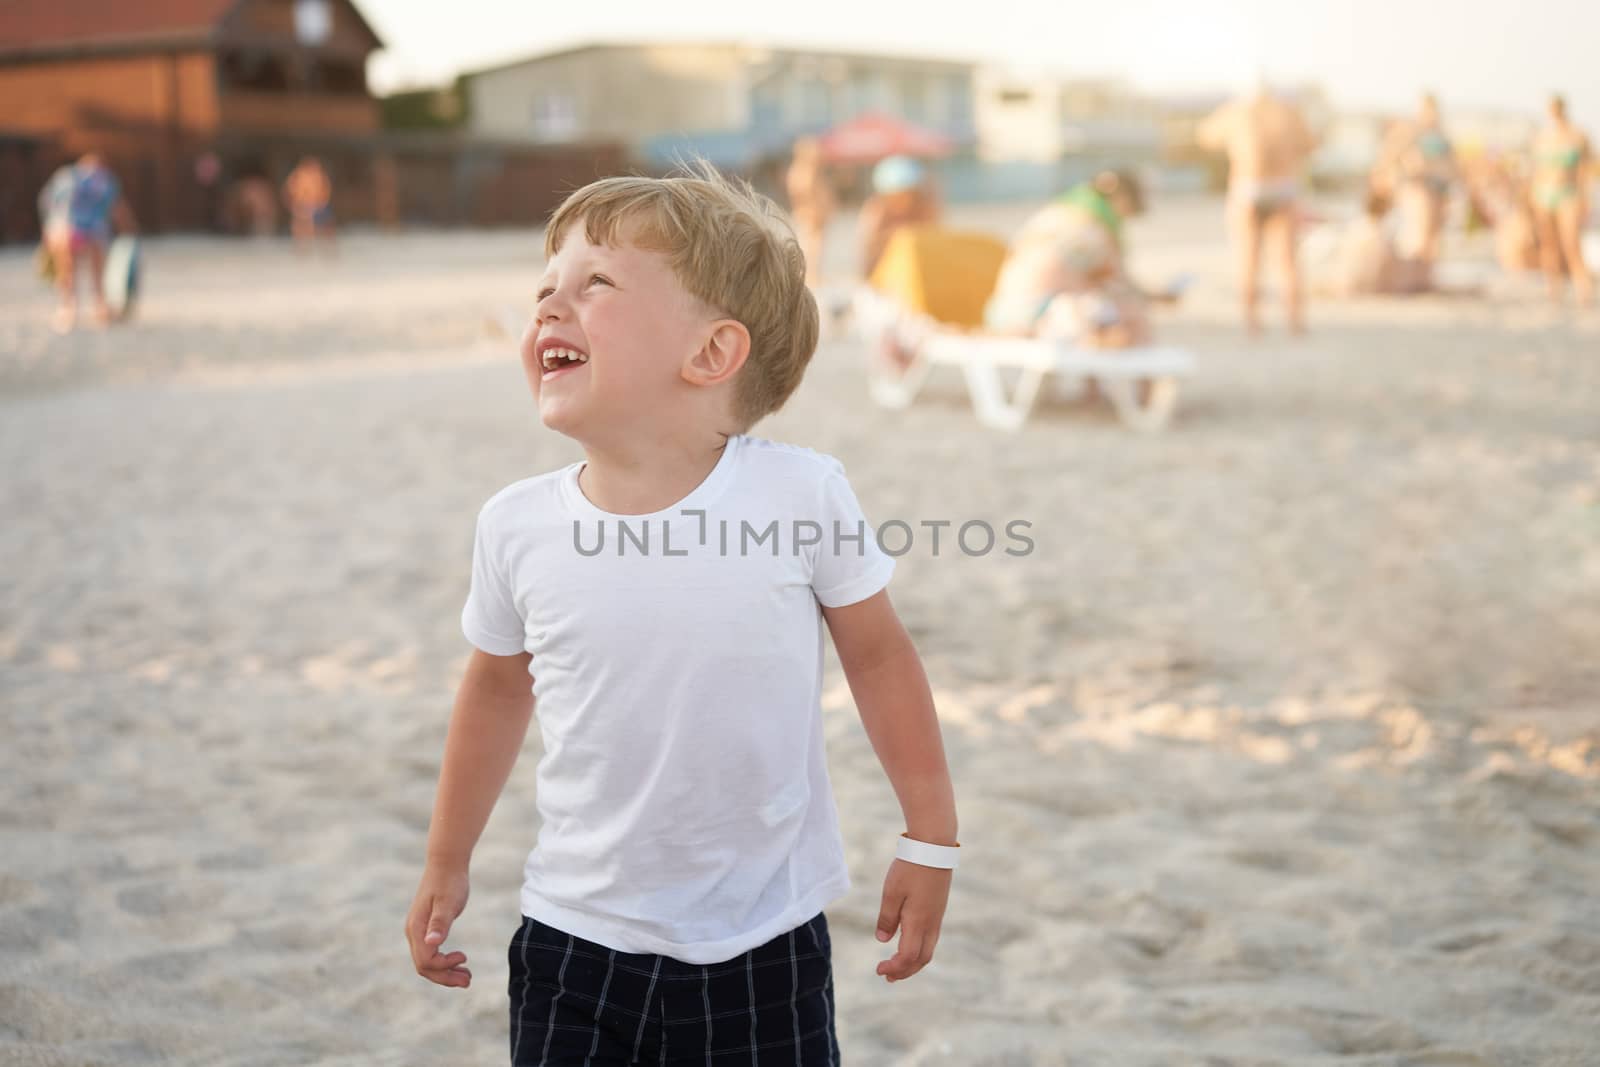 Caucasian boy standing beach. Childhood summertime. Family vacation with one child.